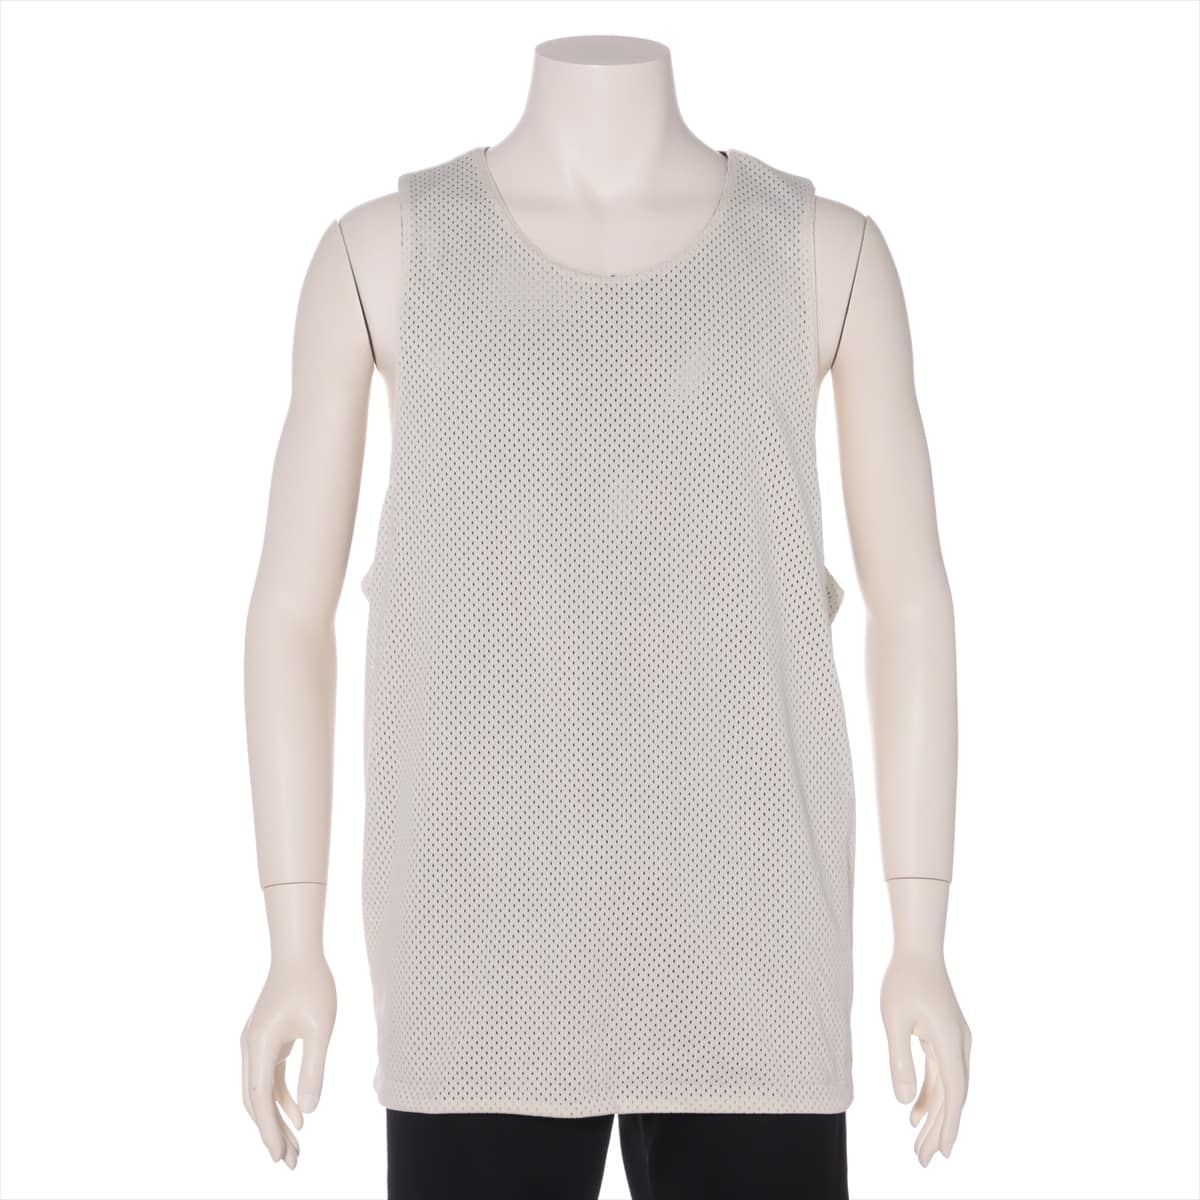 FEAR OF GOD Essentials Polyester Tank top M Men's White  back logo